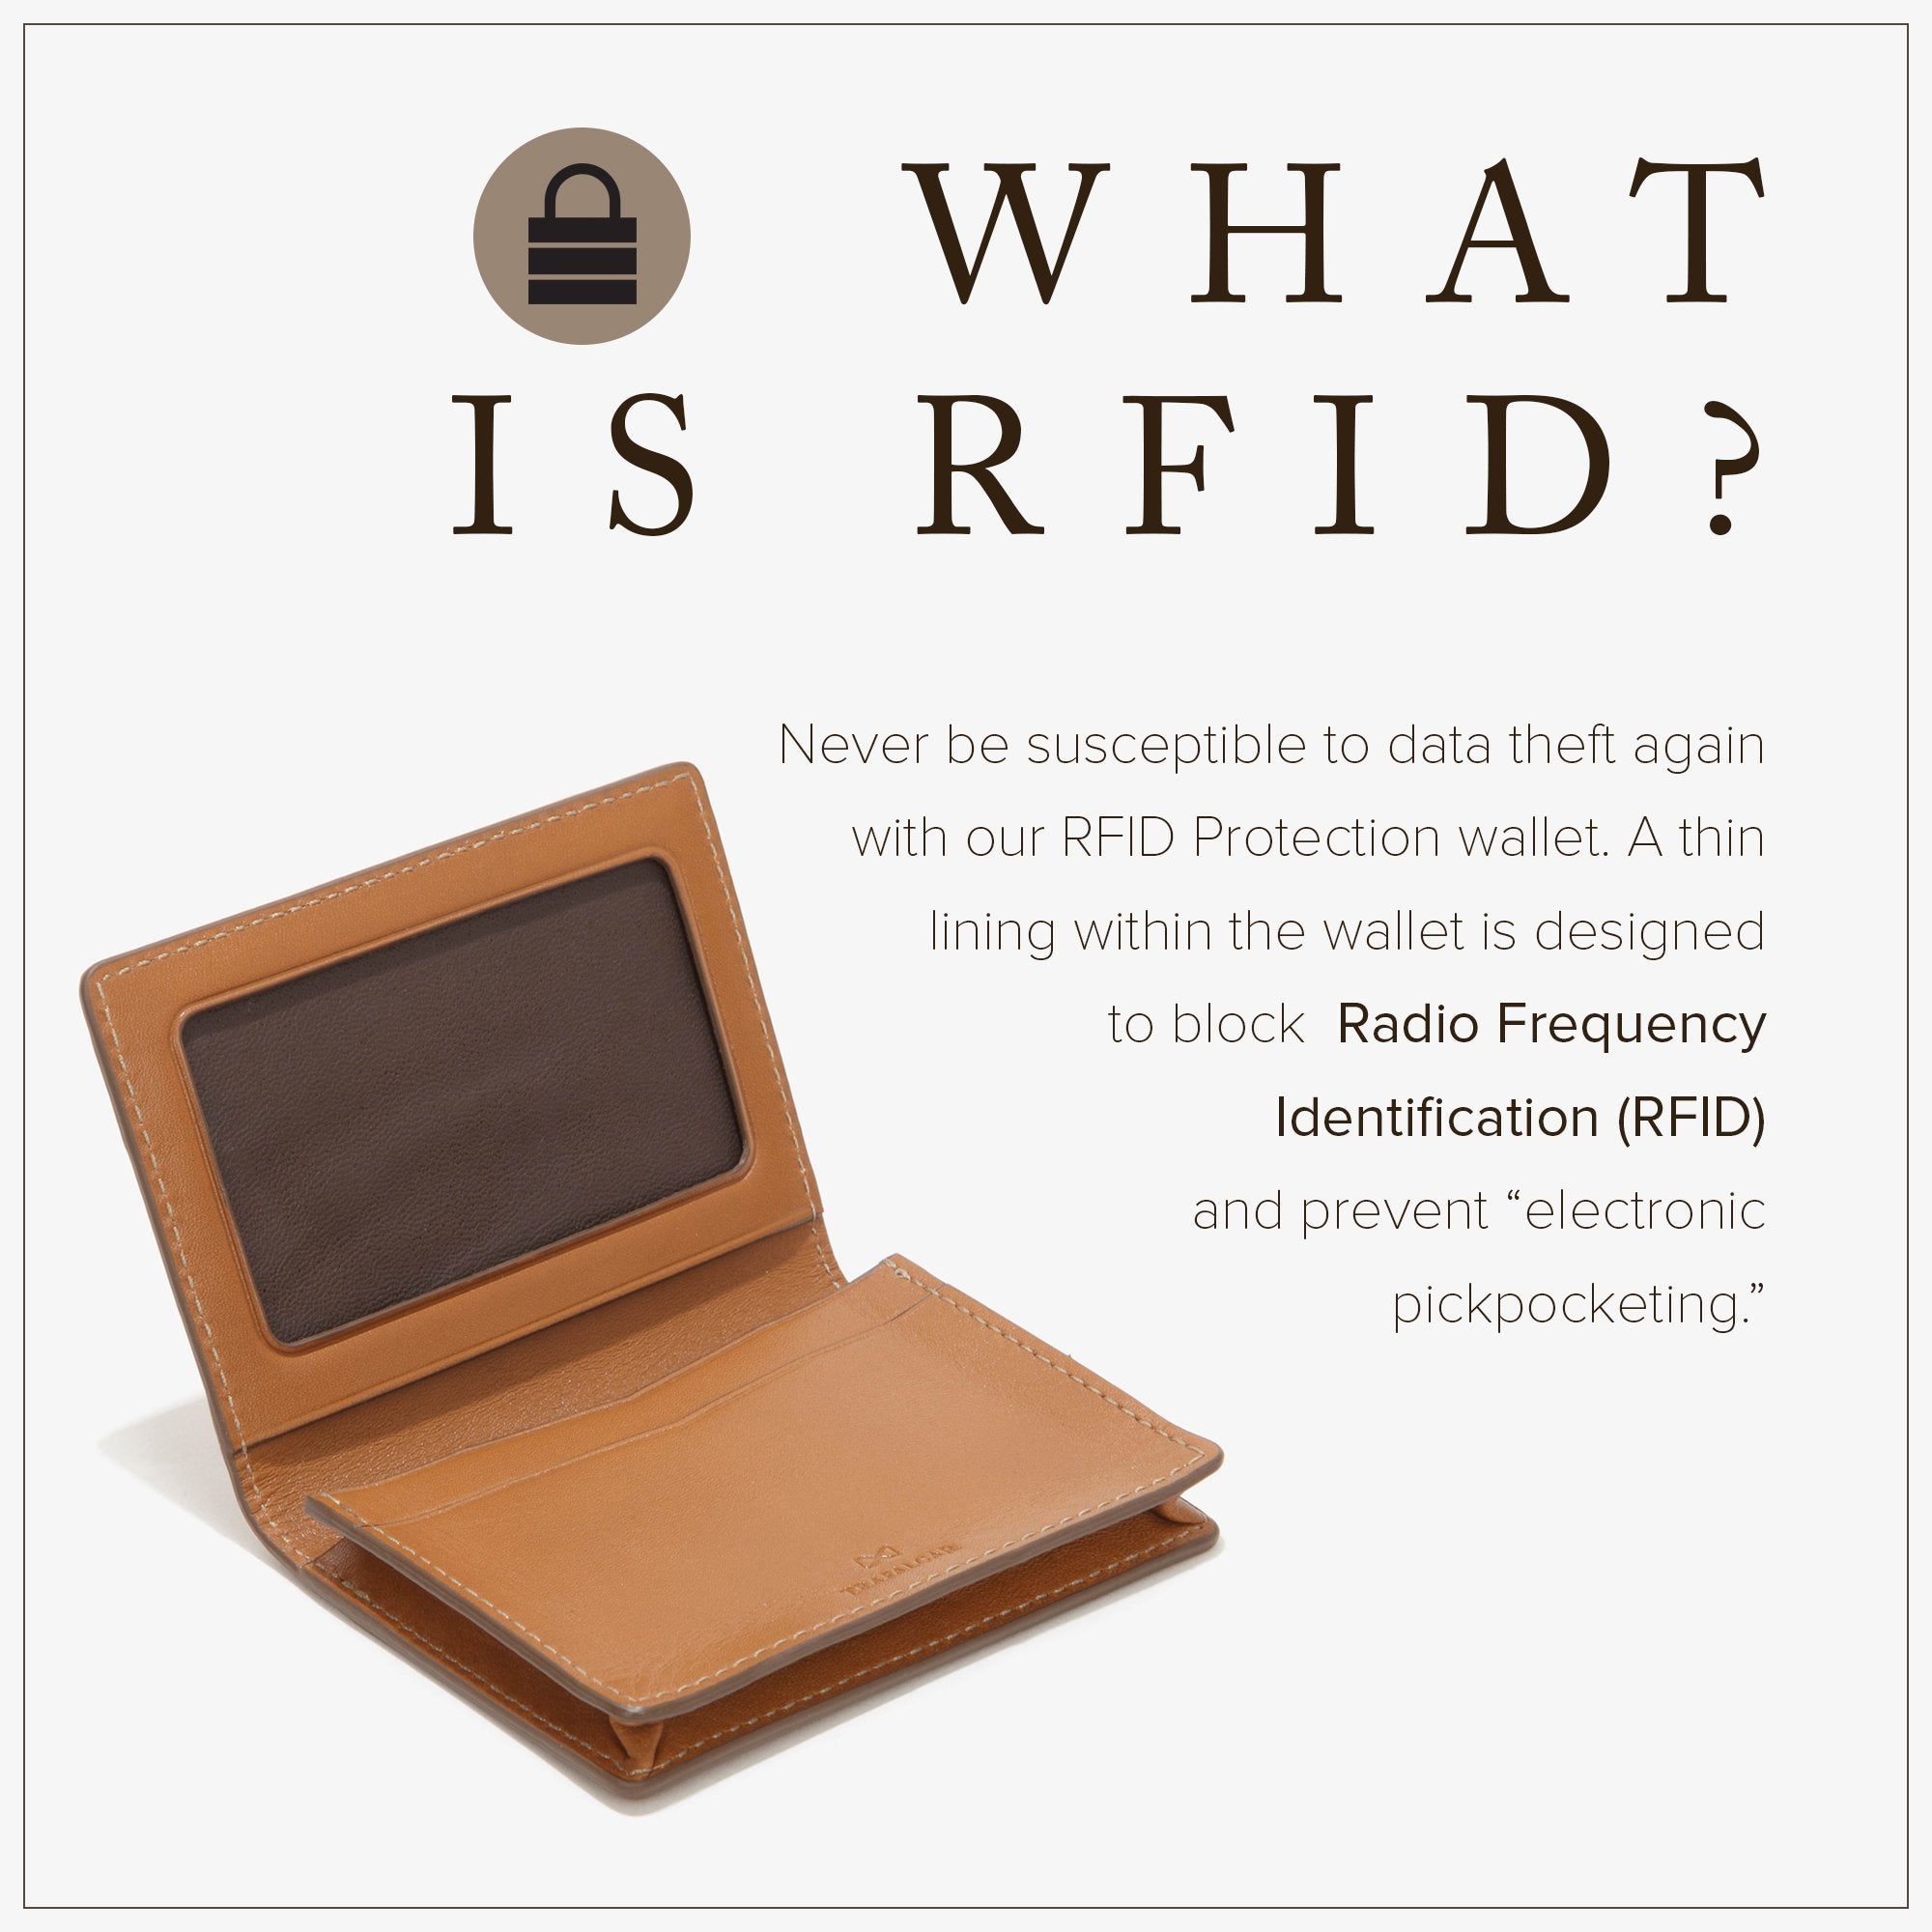 Make Sure You're Protected: 4 Benefits of an RFID Blocking Wallet